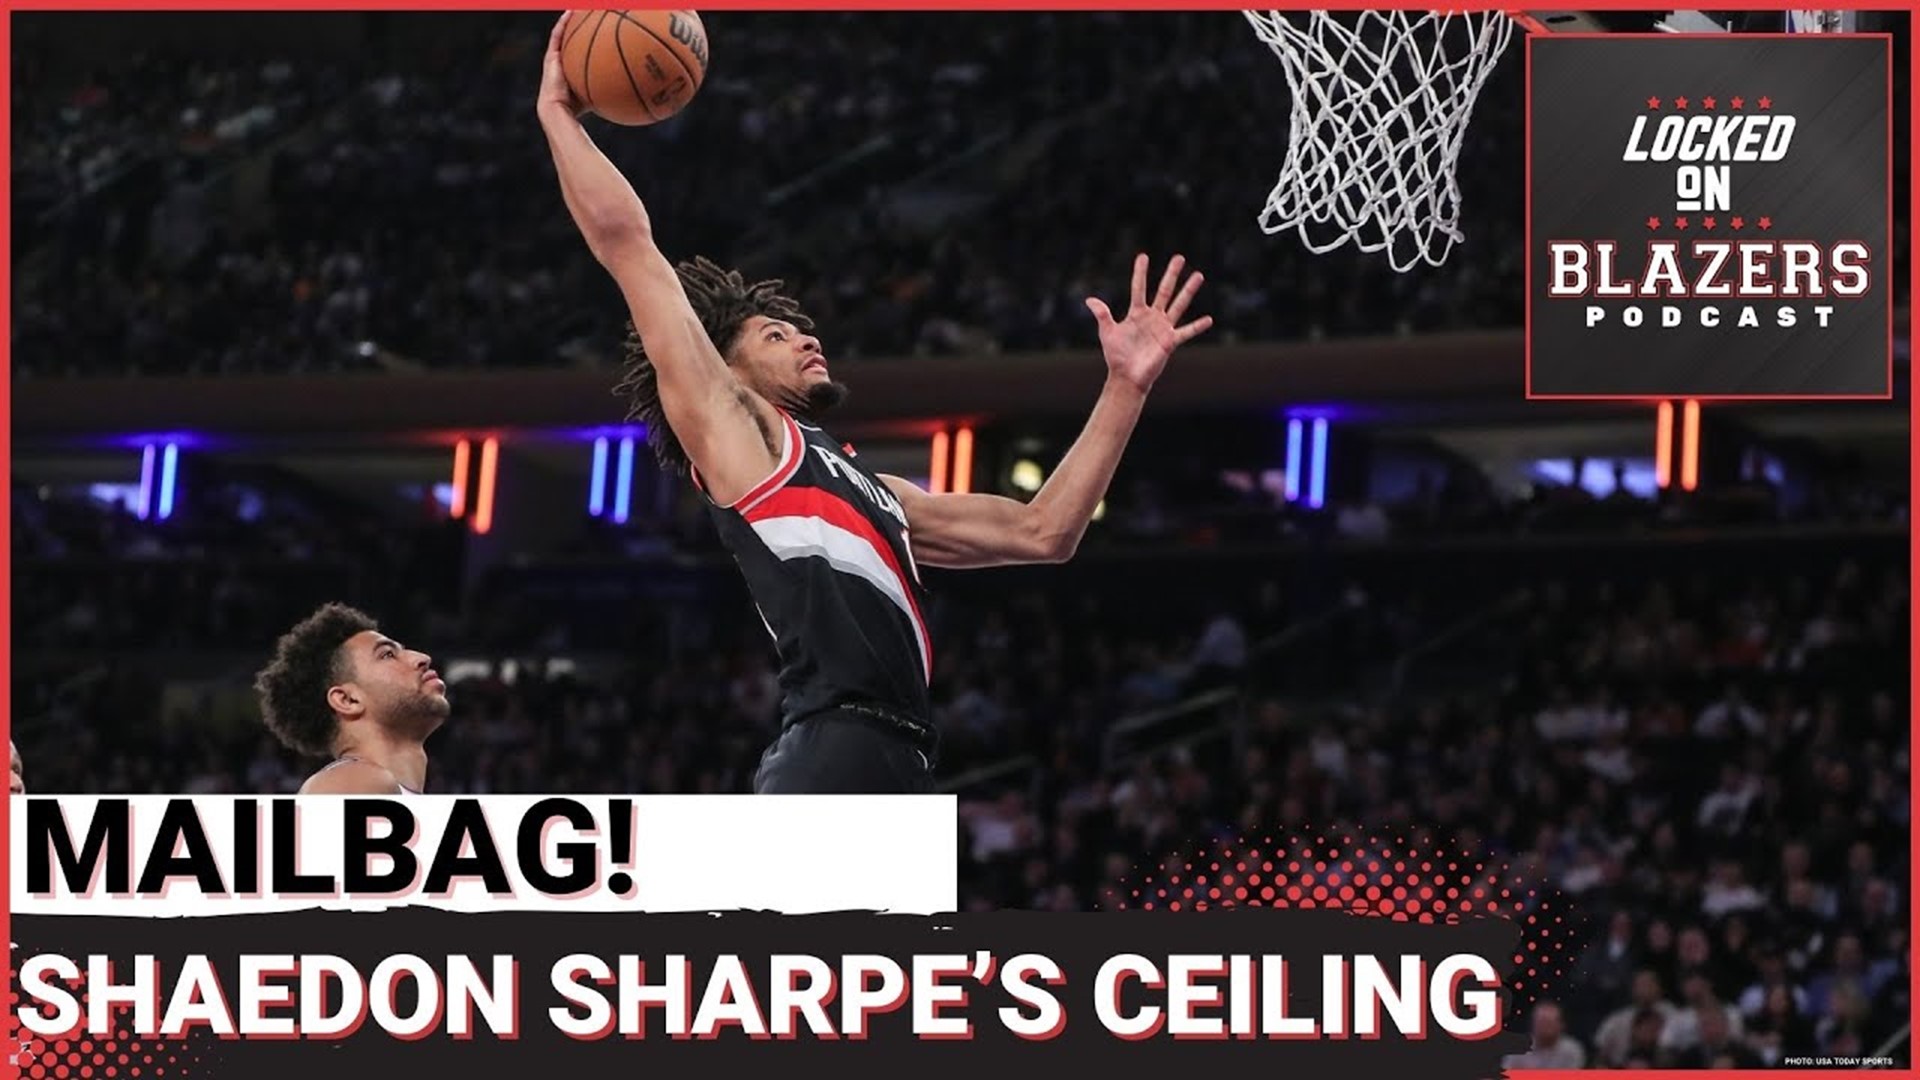 What Is Shaedon Sharpe's Ceiling? | Will the Trail Blazers Trade Up or Back in the Draft? Mailbag!